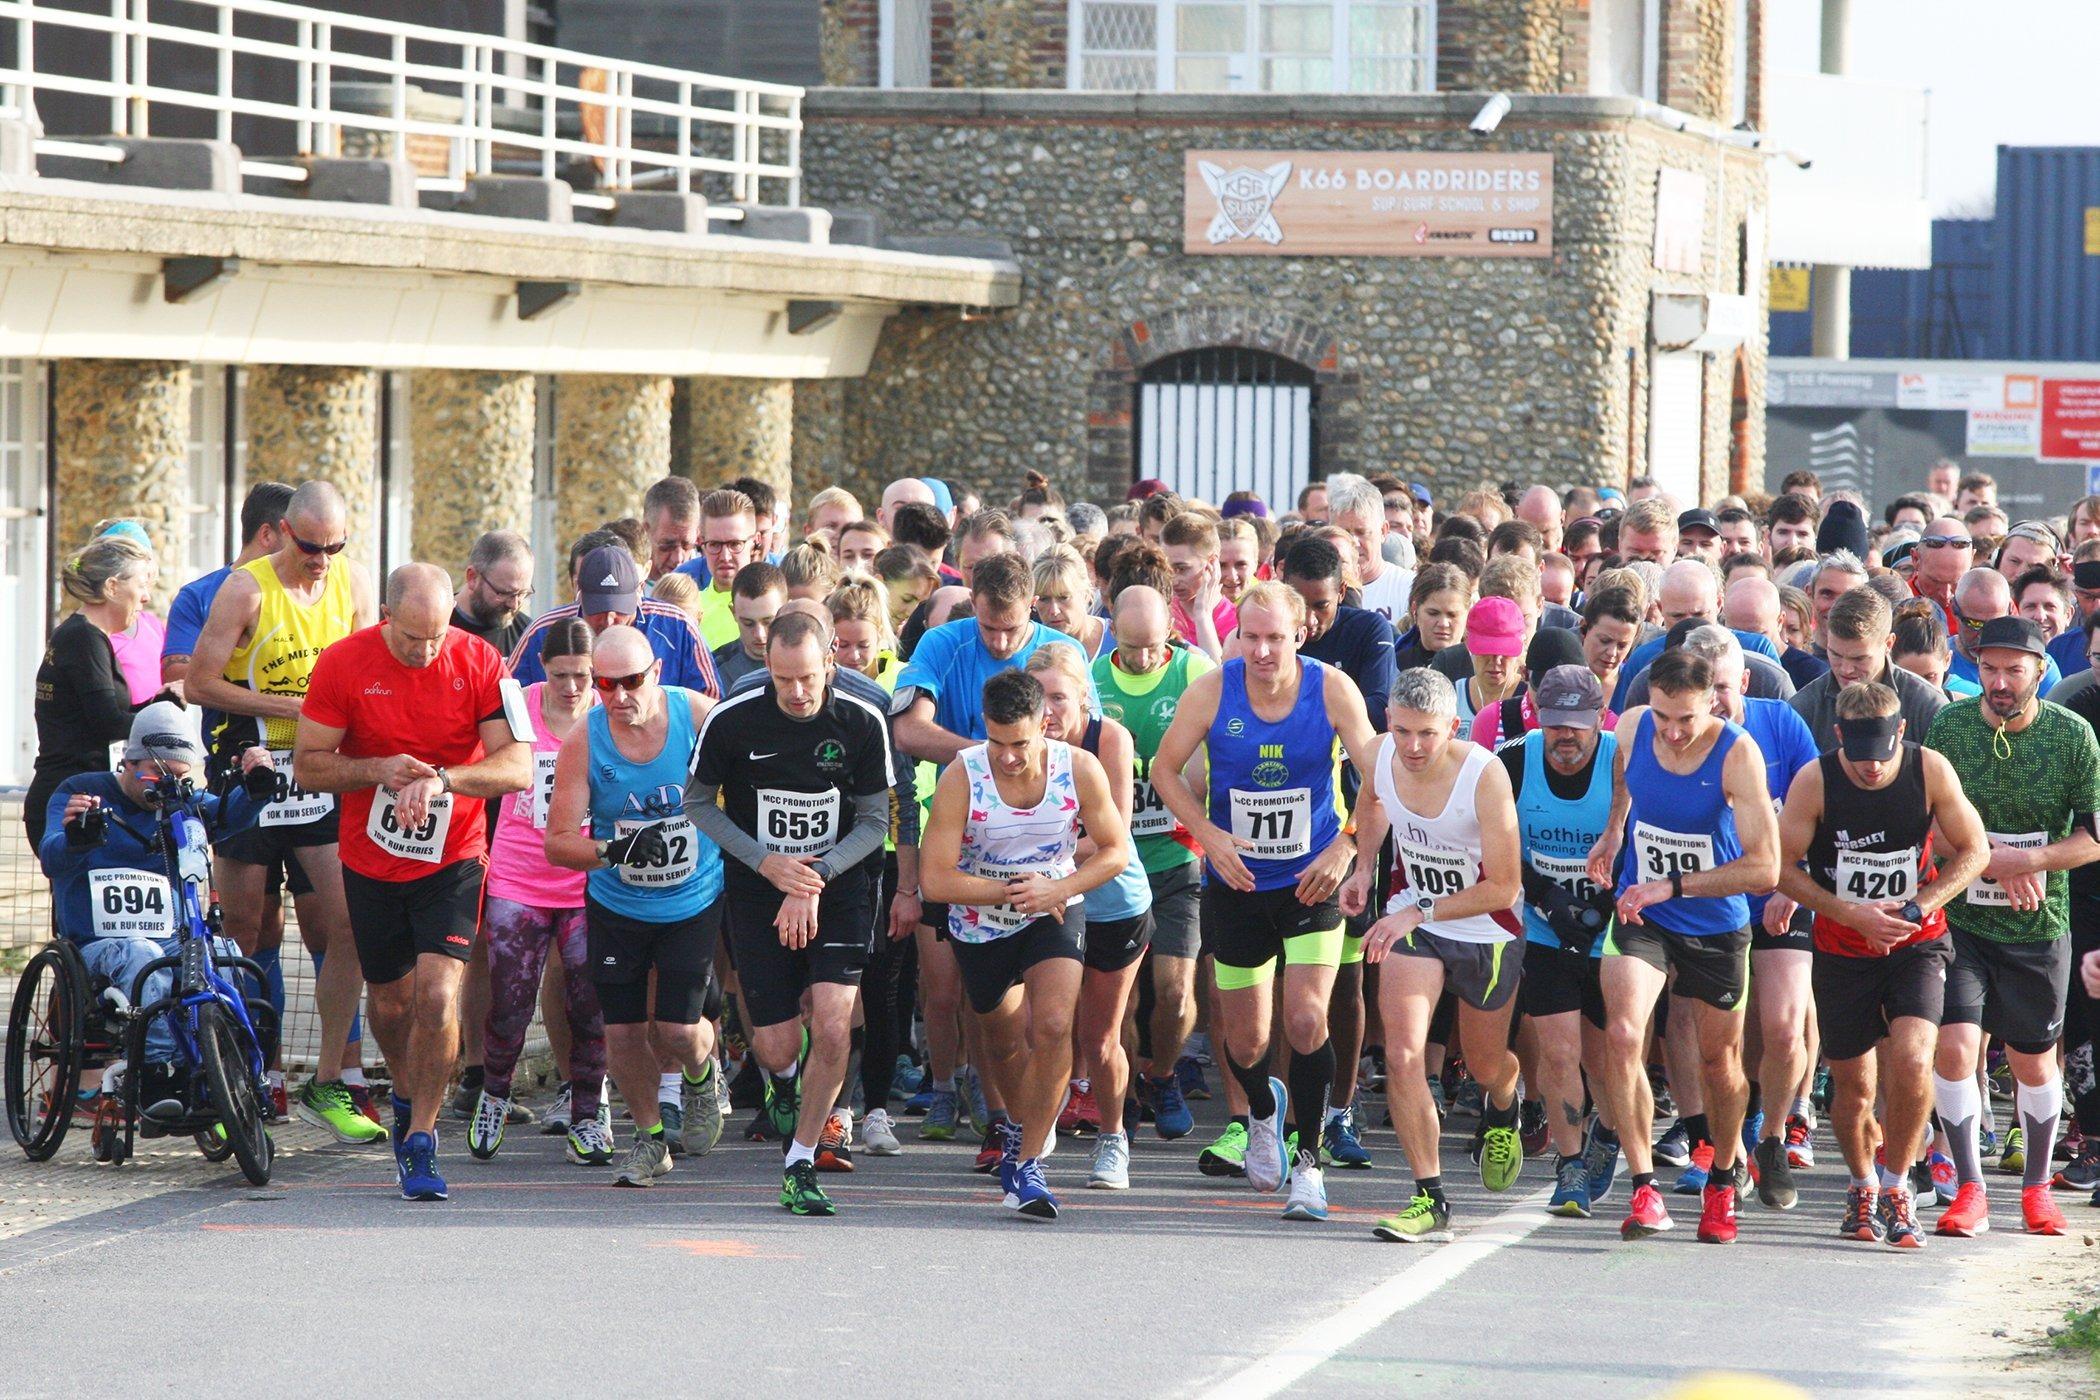 Worthing 10k, one of the largest running events in the south, takes place on Sunday, June 7. Photo by Derek Martin DM19104154a